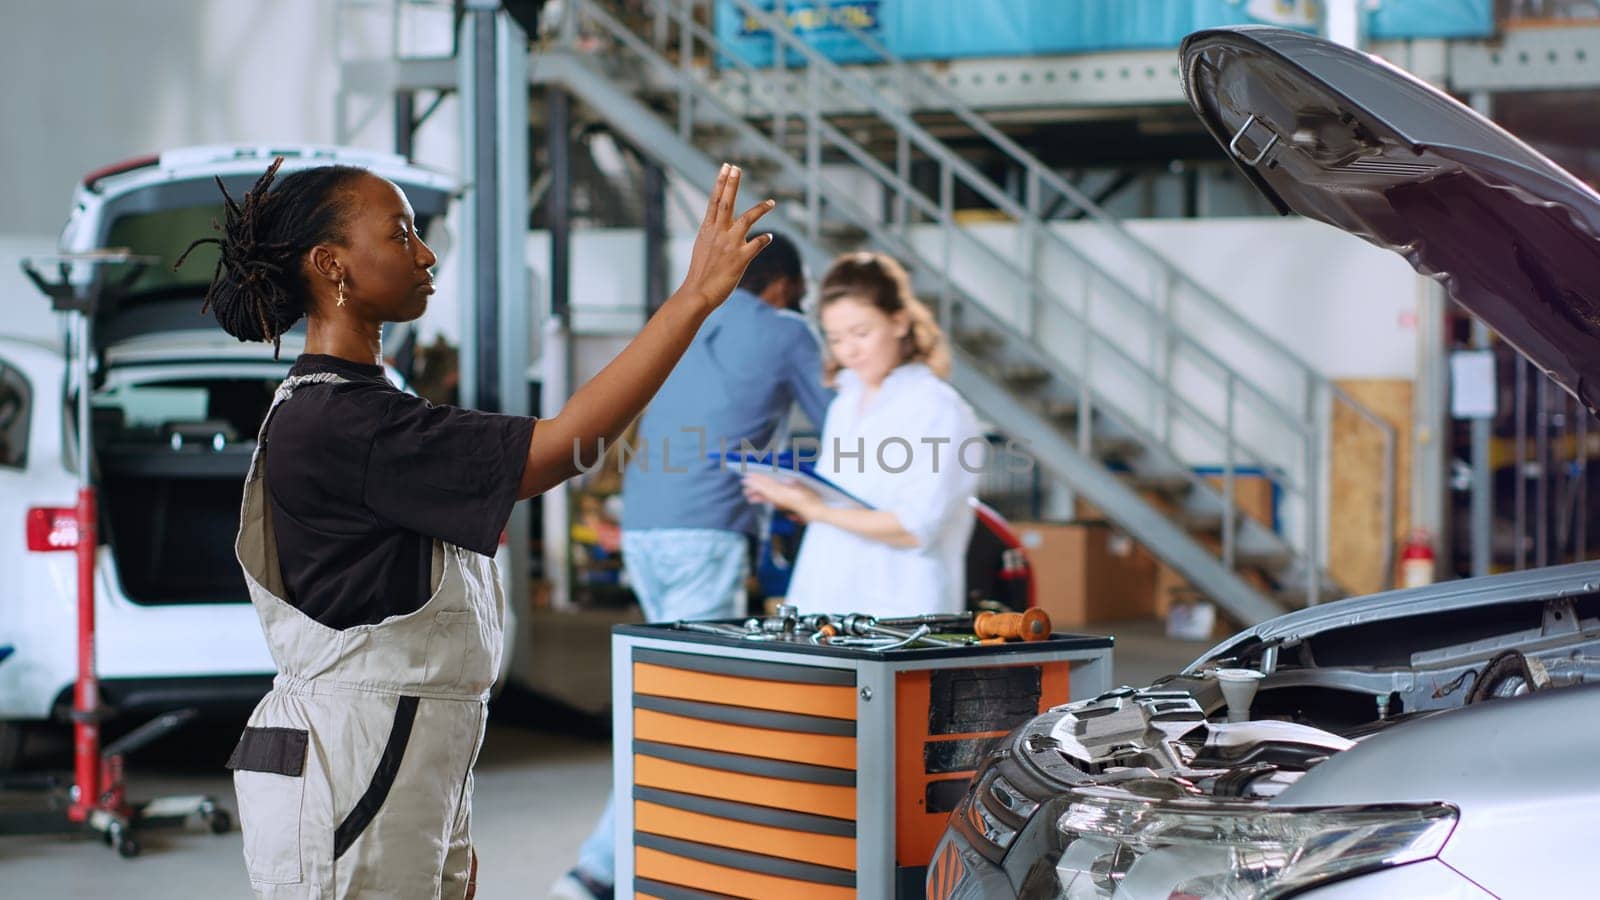 Licensed engineer in auto repair shop using augmented reality hologram to visualize car components in order to fix them. African american woman using AR technology while working on damaged vehicle